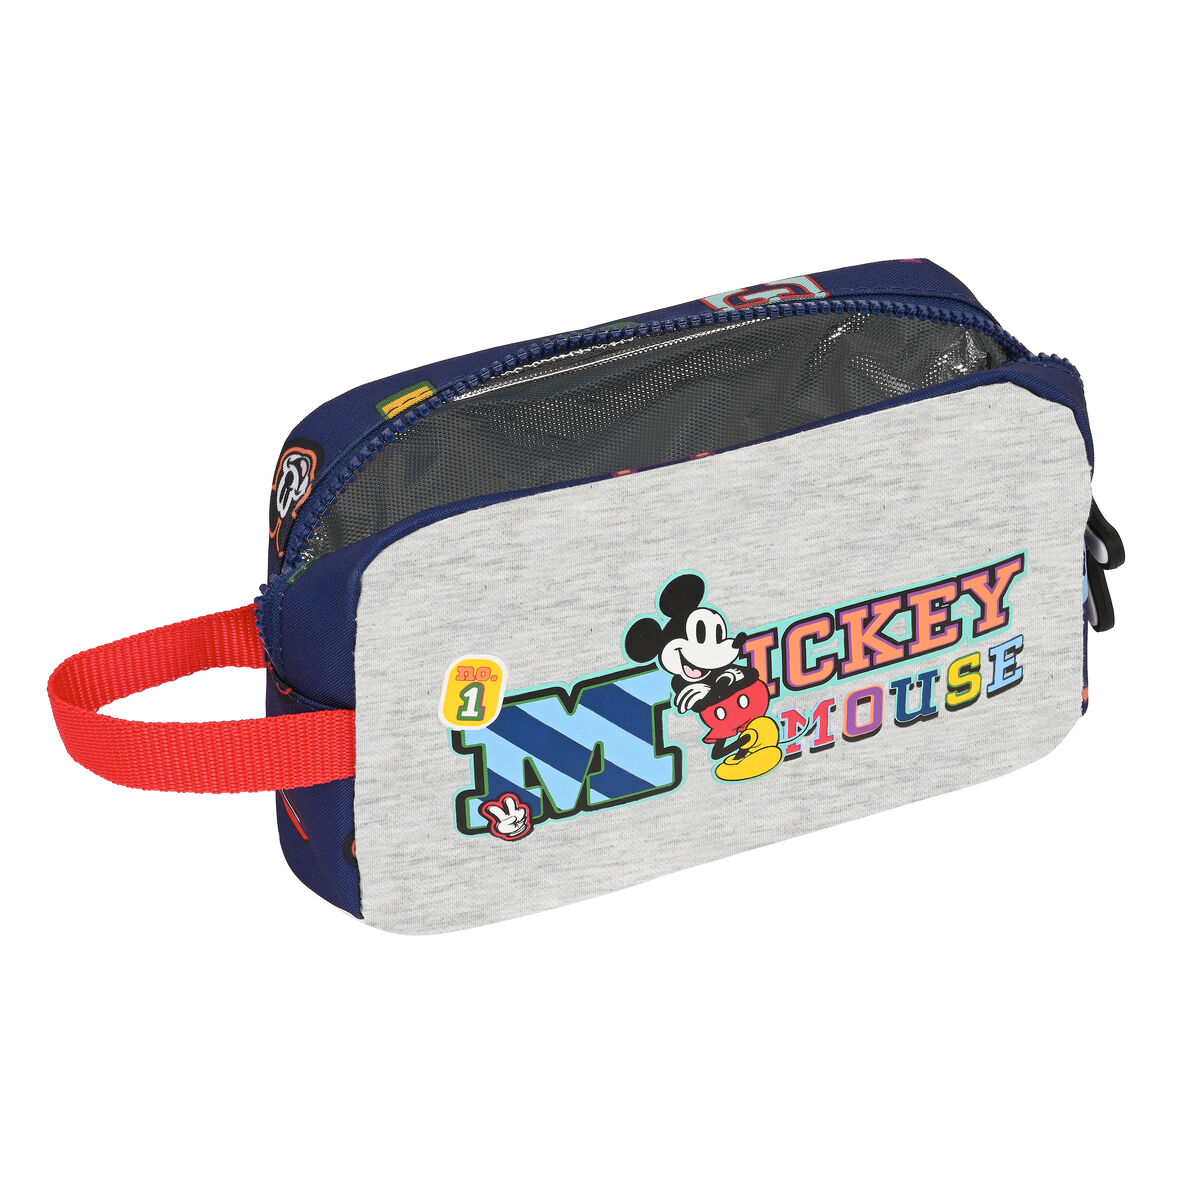 Thermal Lunchbox Mickey Mouse Clubhouse Only one 21.5 x 12 x 6.5 cm Navy Blue